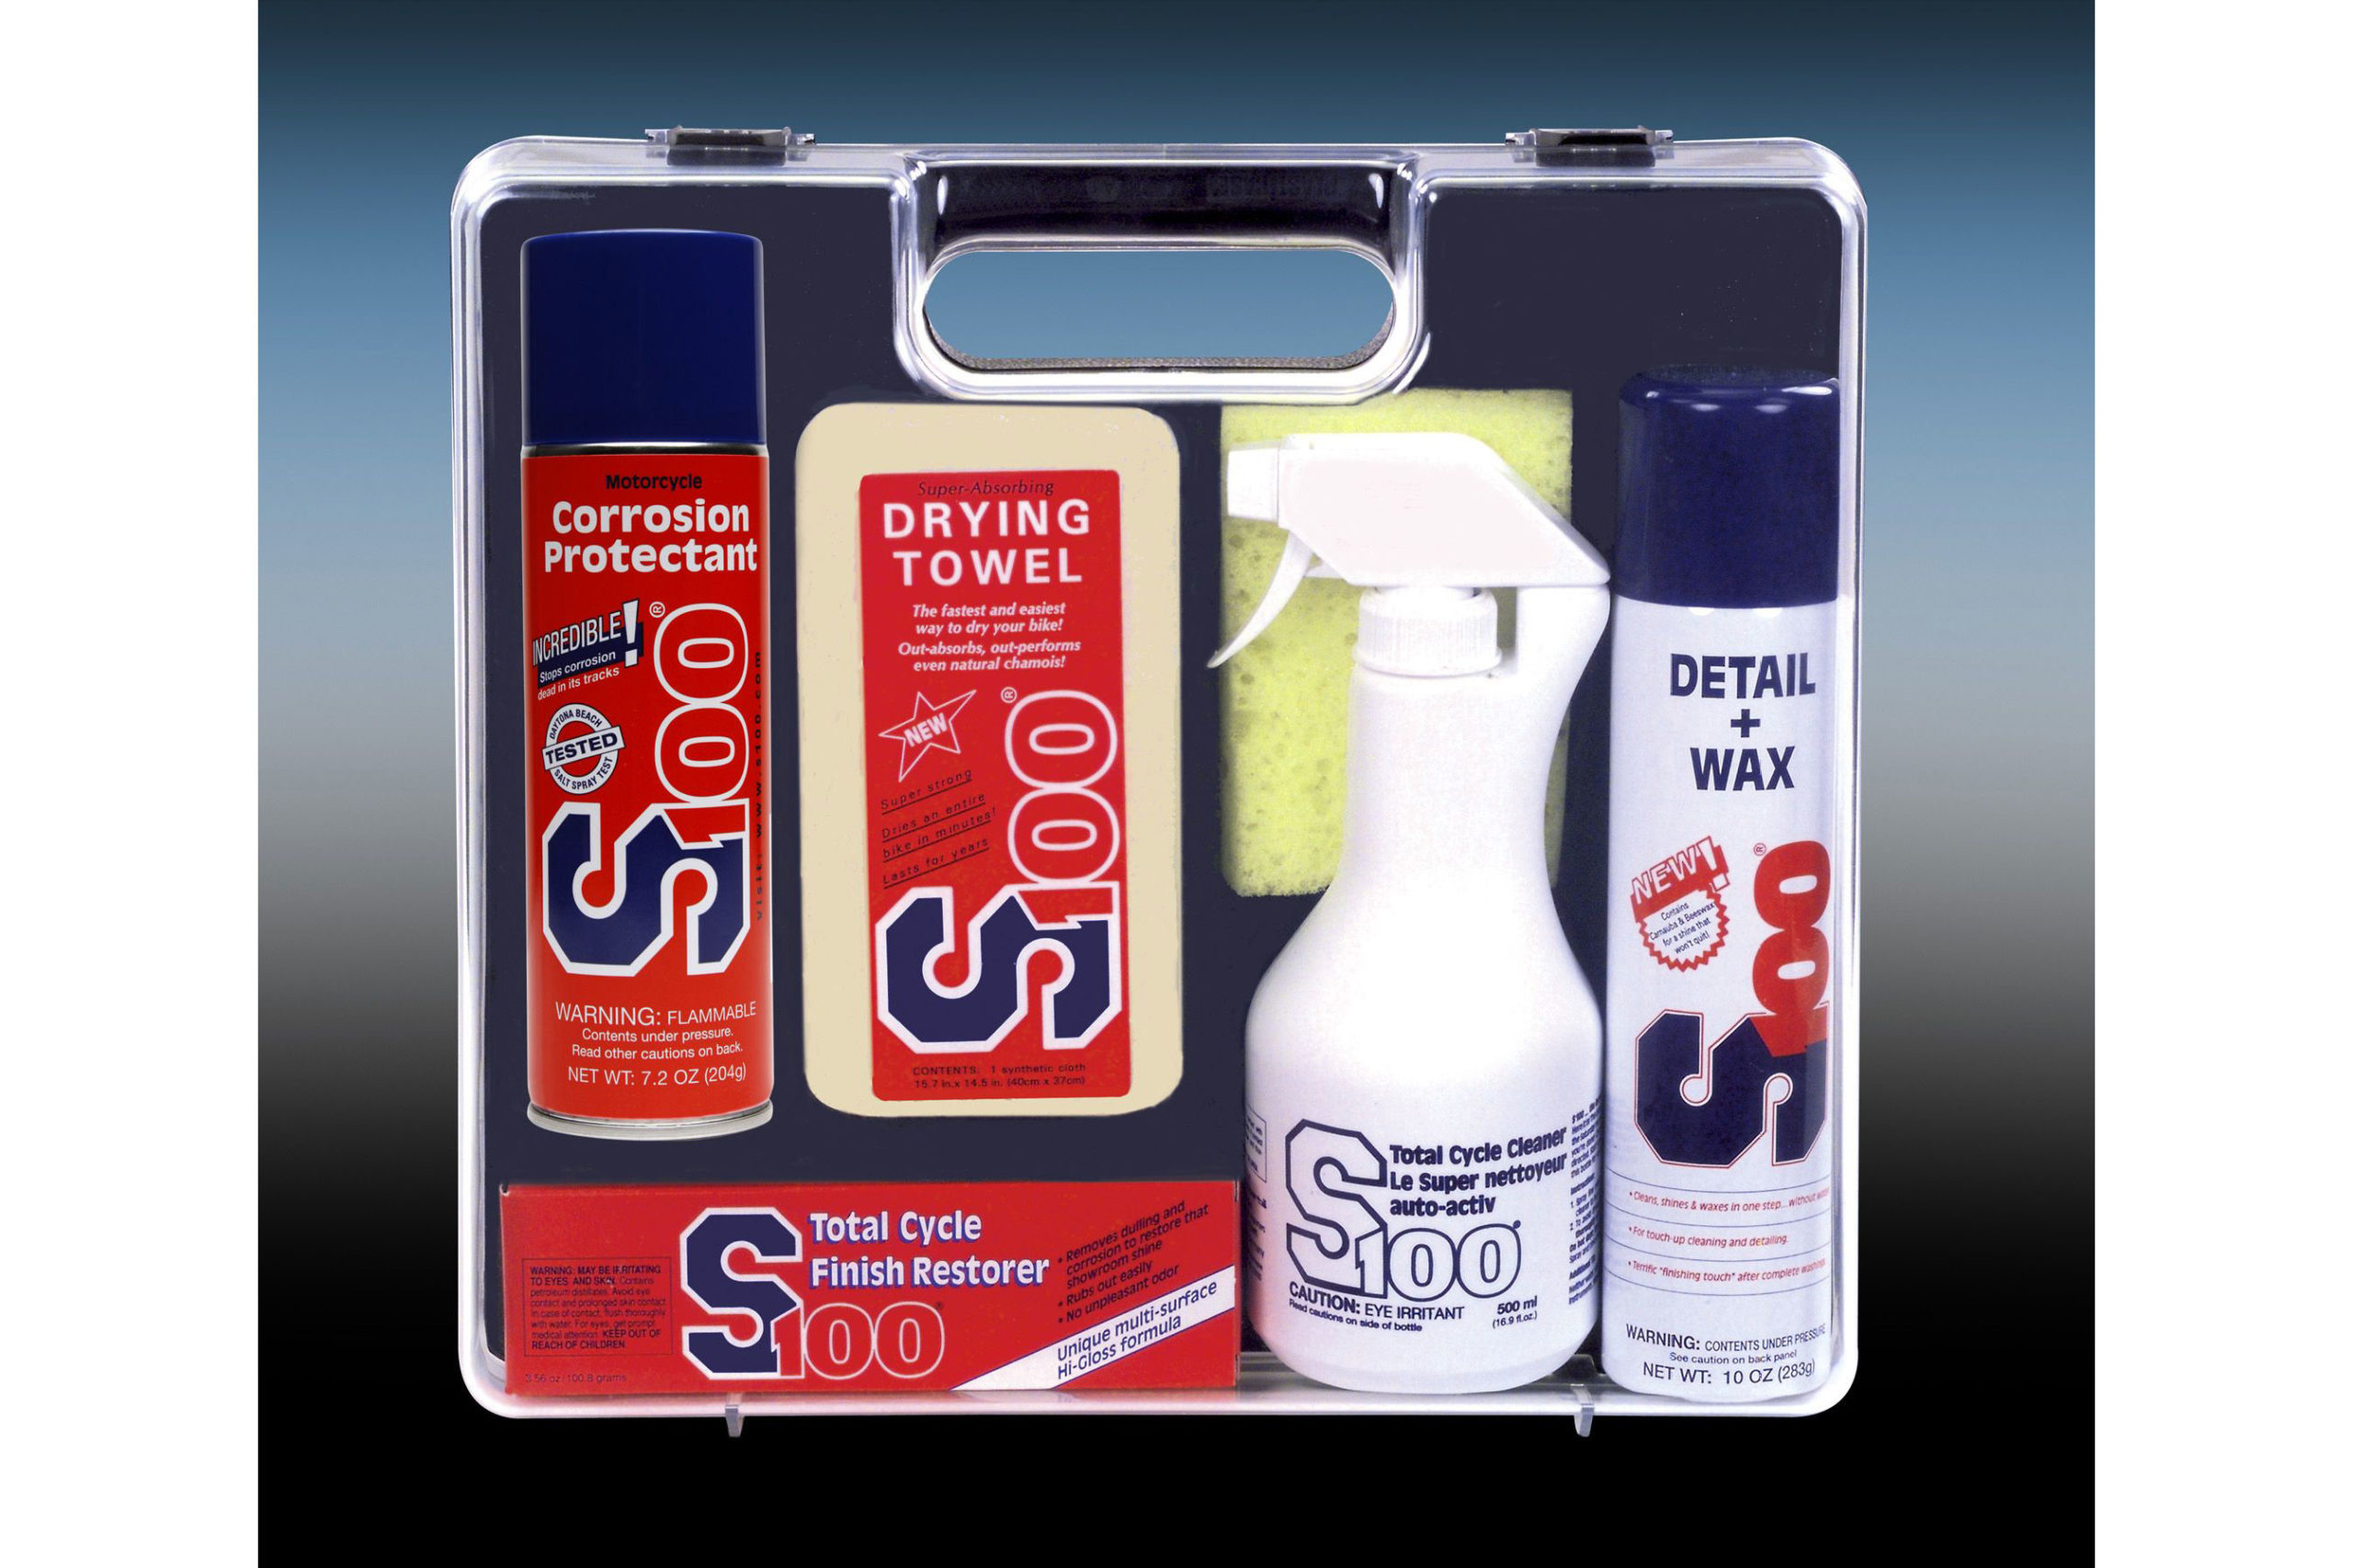 S100 Motorcycle Cleaning Products - Get Lowered Cycles